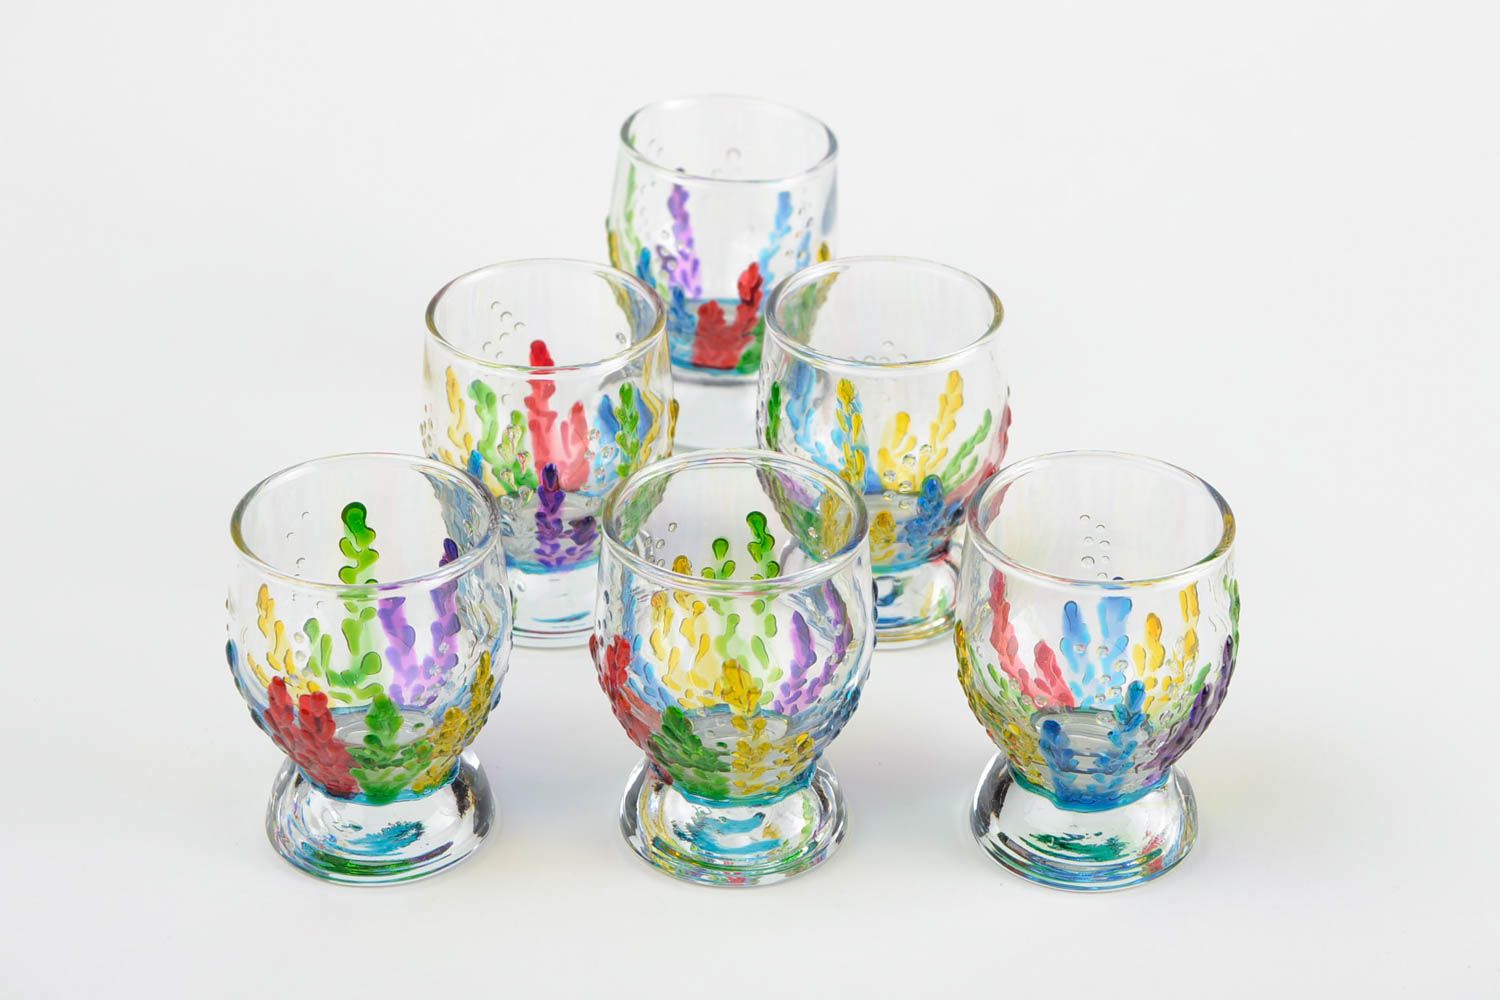 Unusual handmade shot glass shot glasses set 6 pieces painted glass gift ideas photo 4